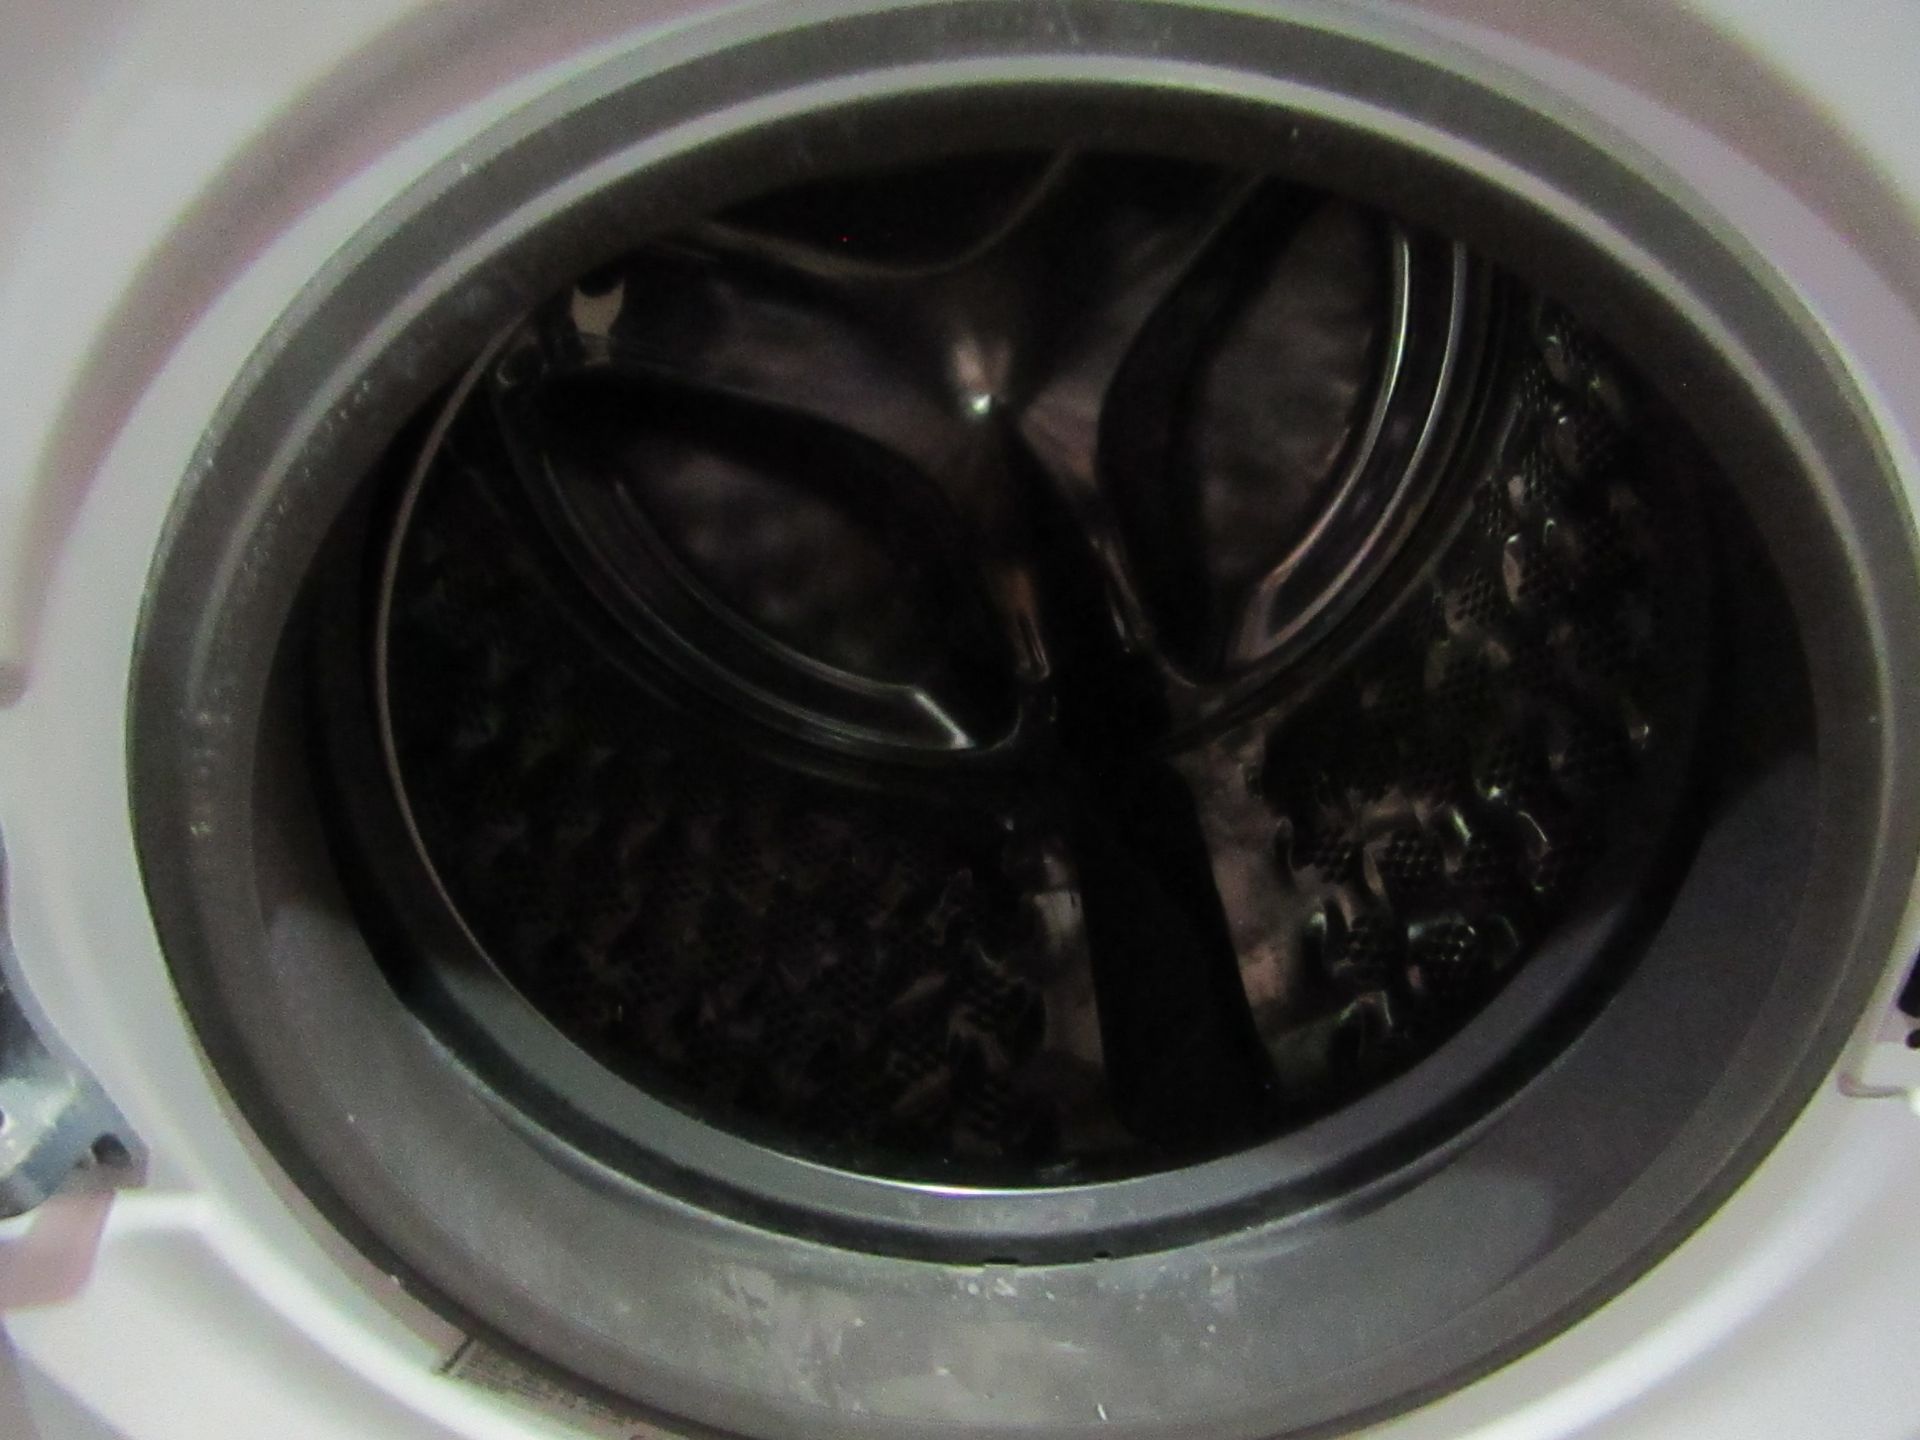 hisense 9kg washing machine, powers ona dn spins but we havent connected it to water to check any - Image 3 of 4